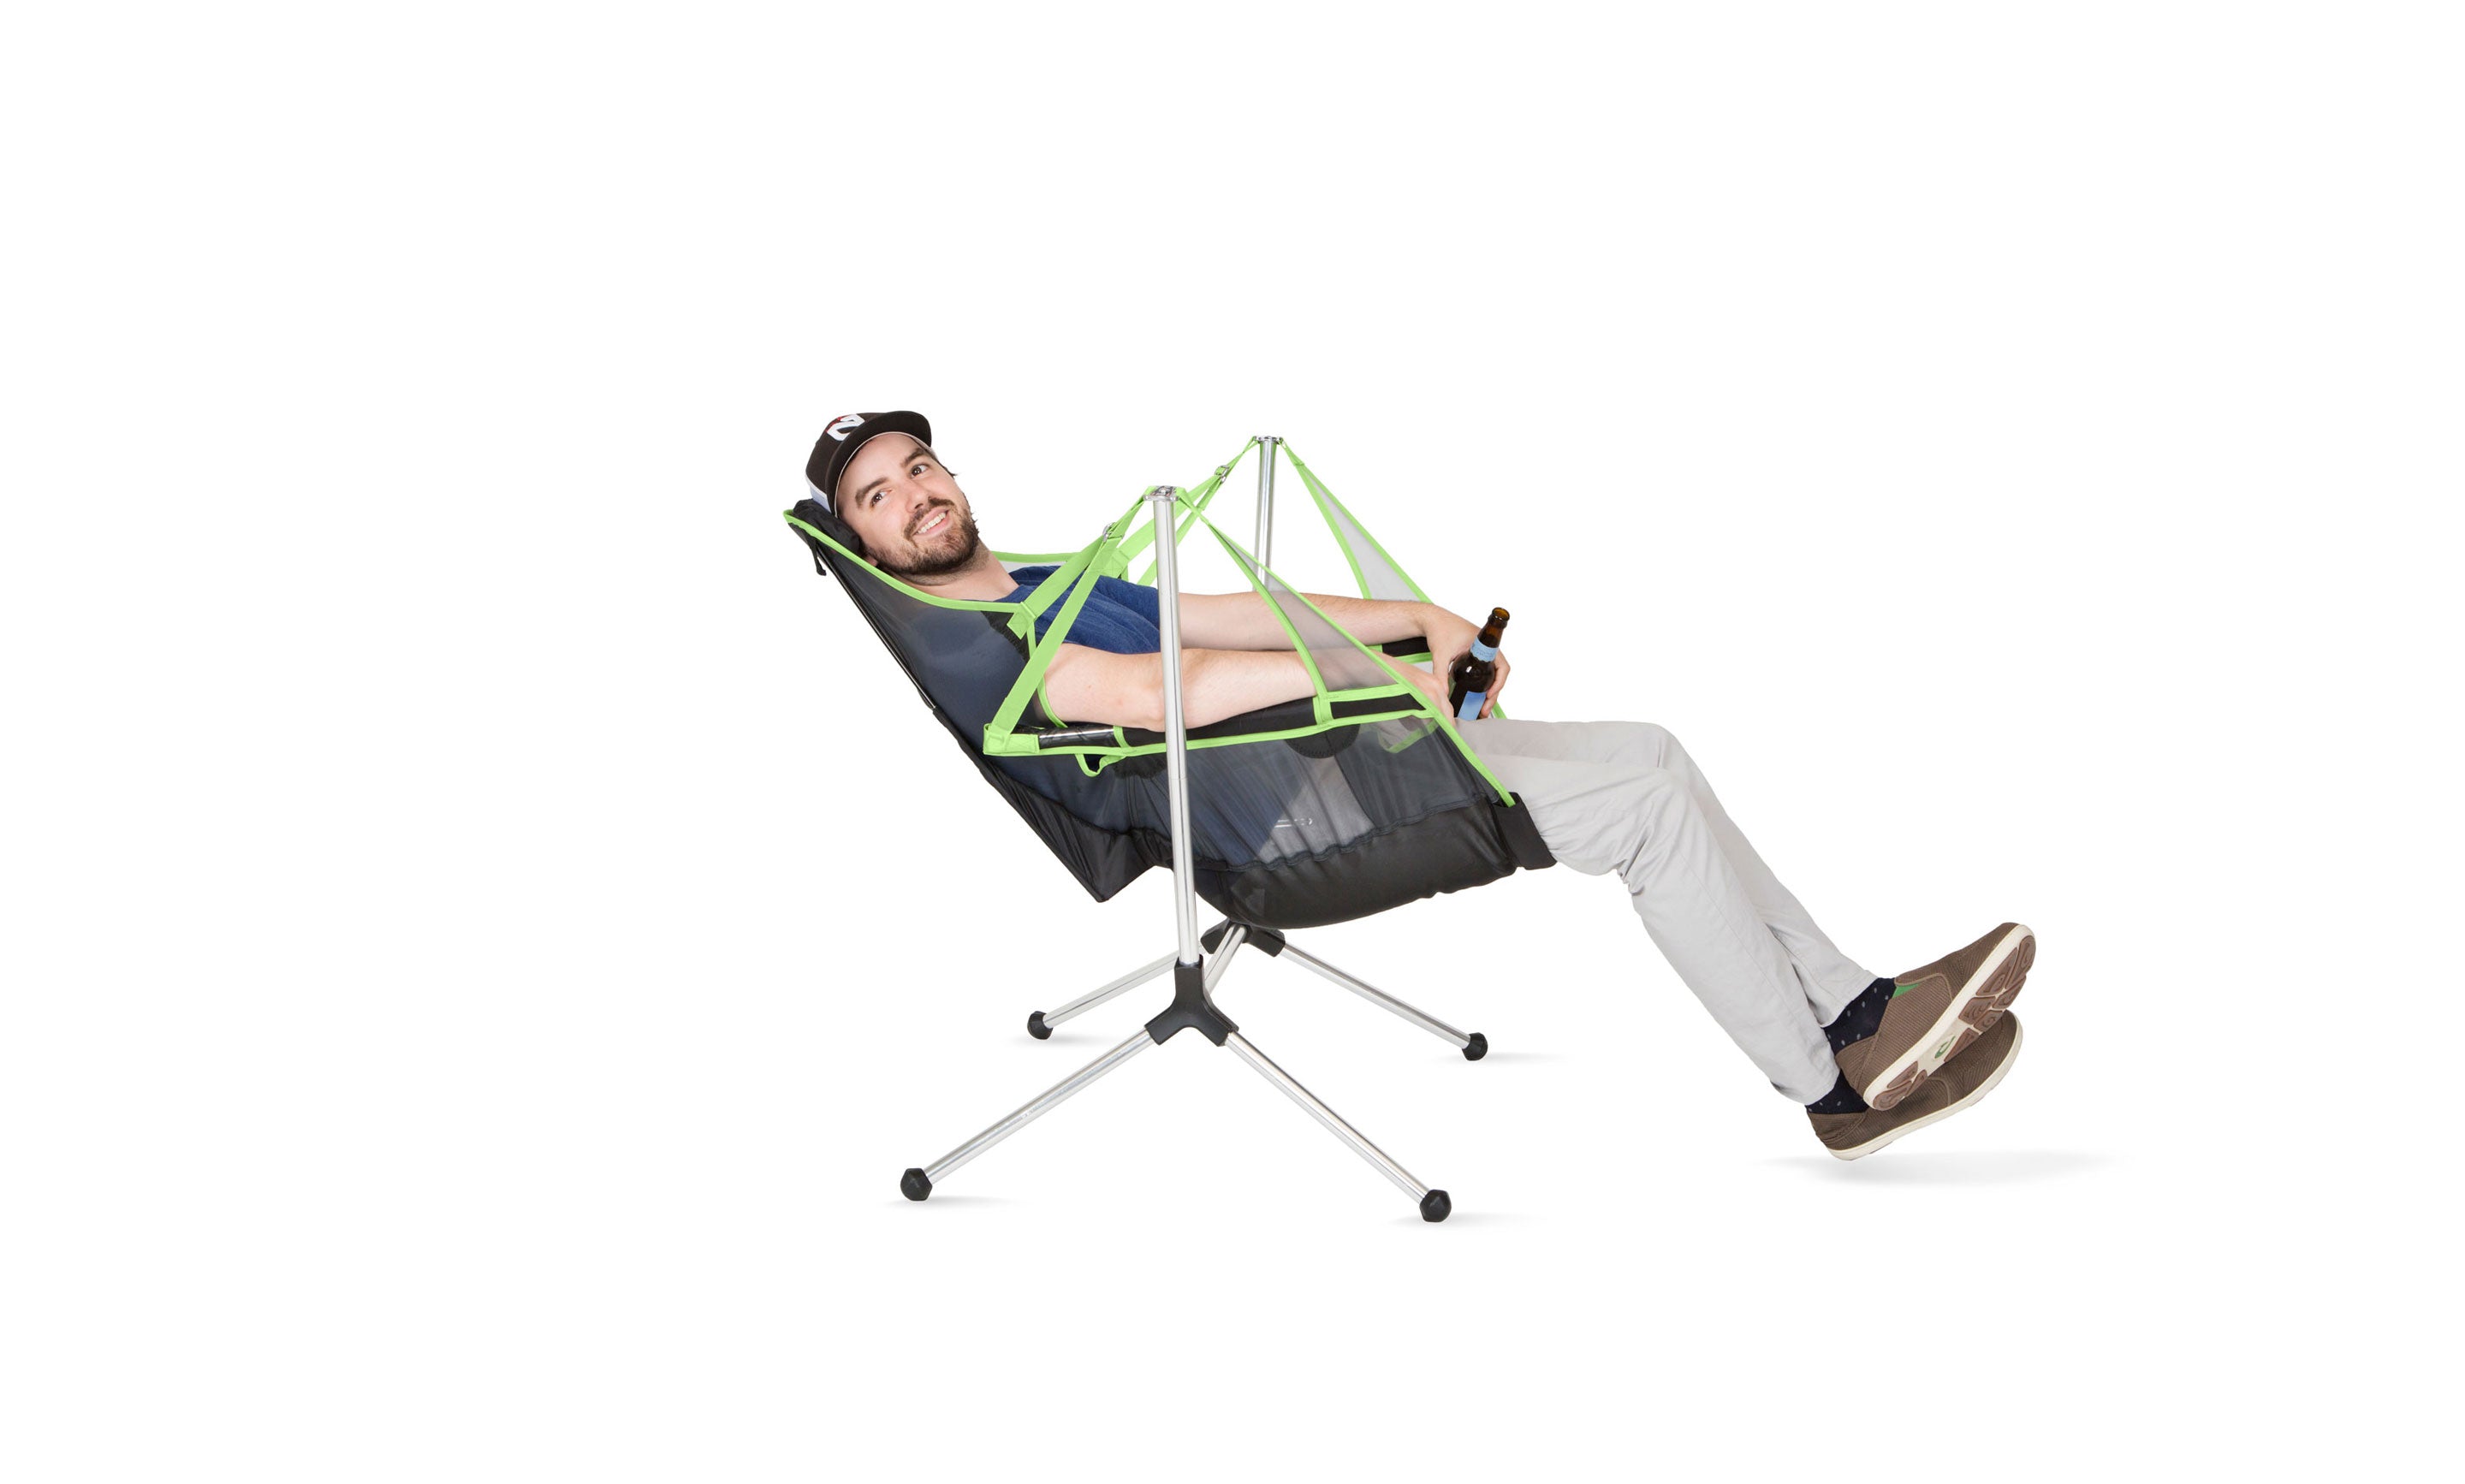 The Stargaze™ Recliner is a suspended engineered chair that allows